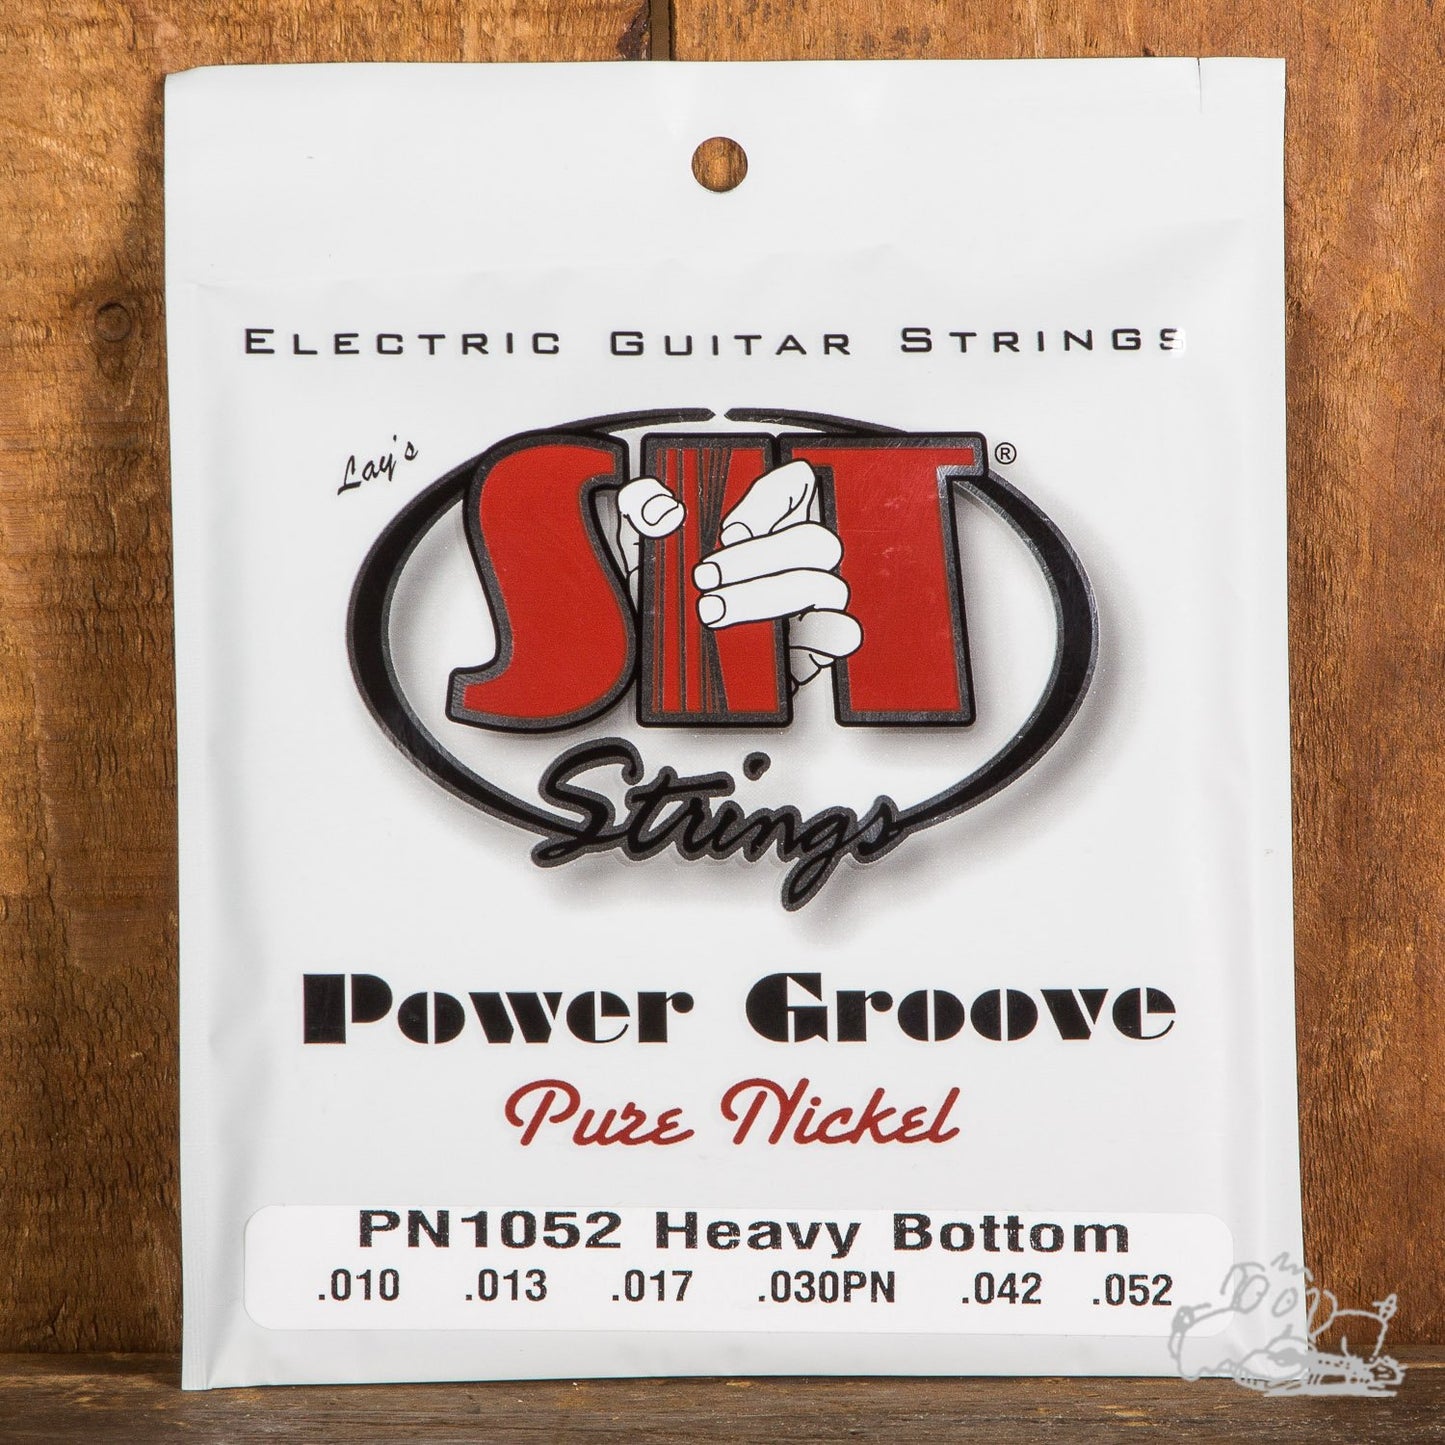 S.I.T. Power Groove Pure Nickel Electric Guitar Strings